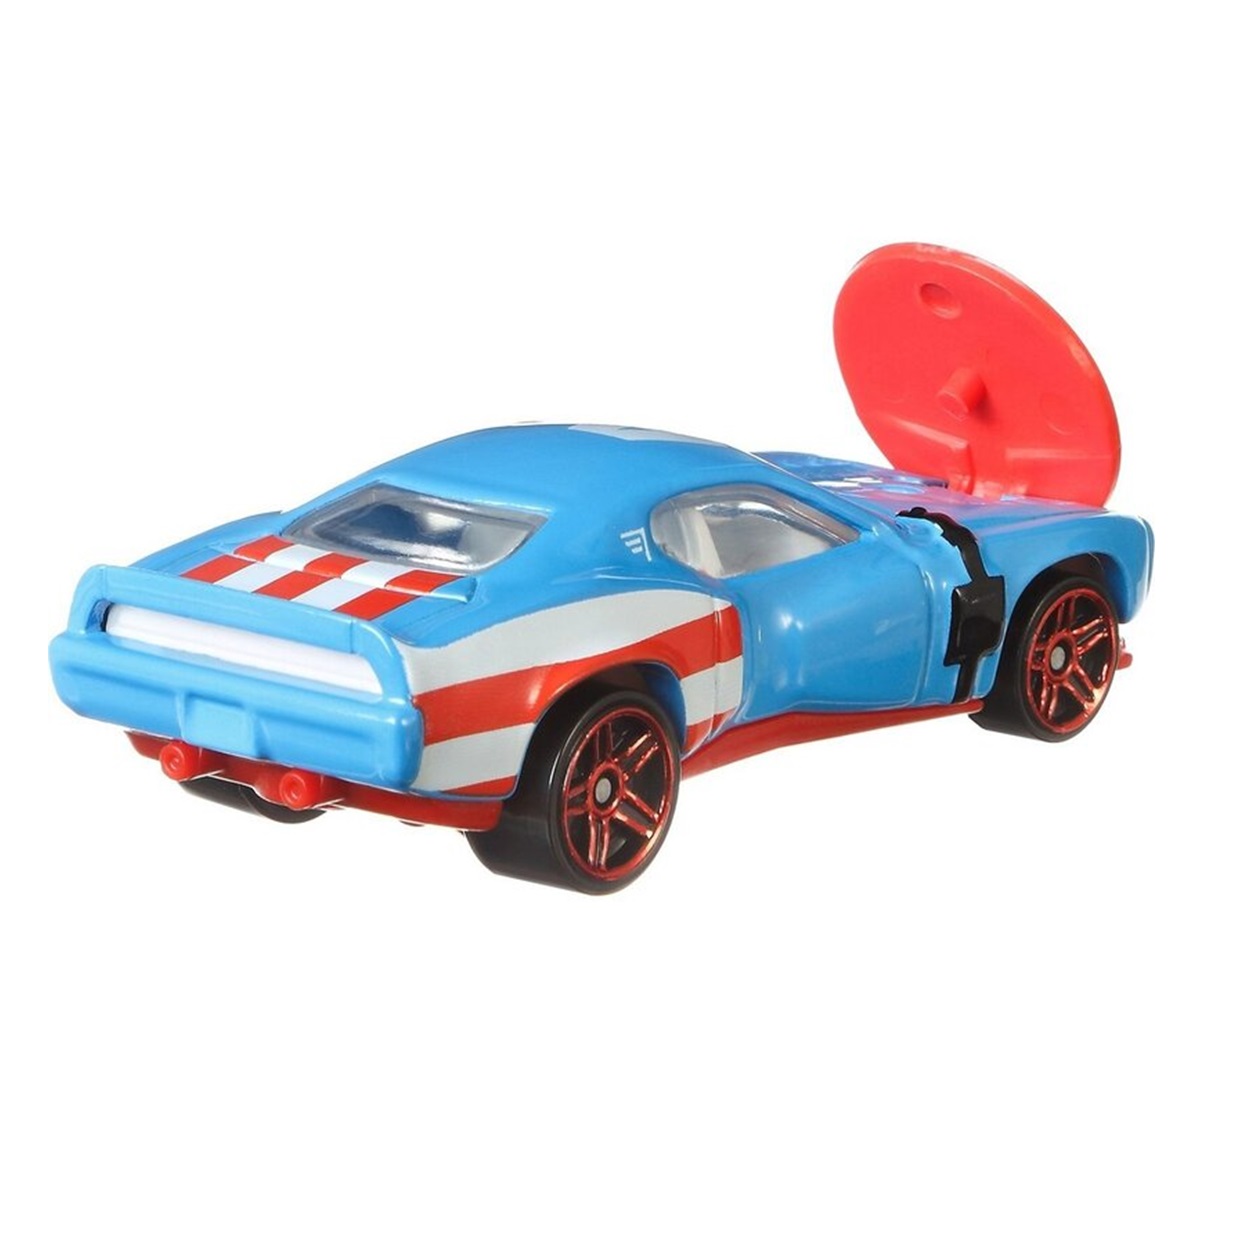 Capitán América Action Feature 2/5 Character Cars Hotwheels 